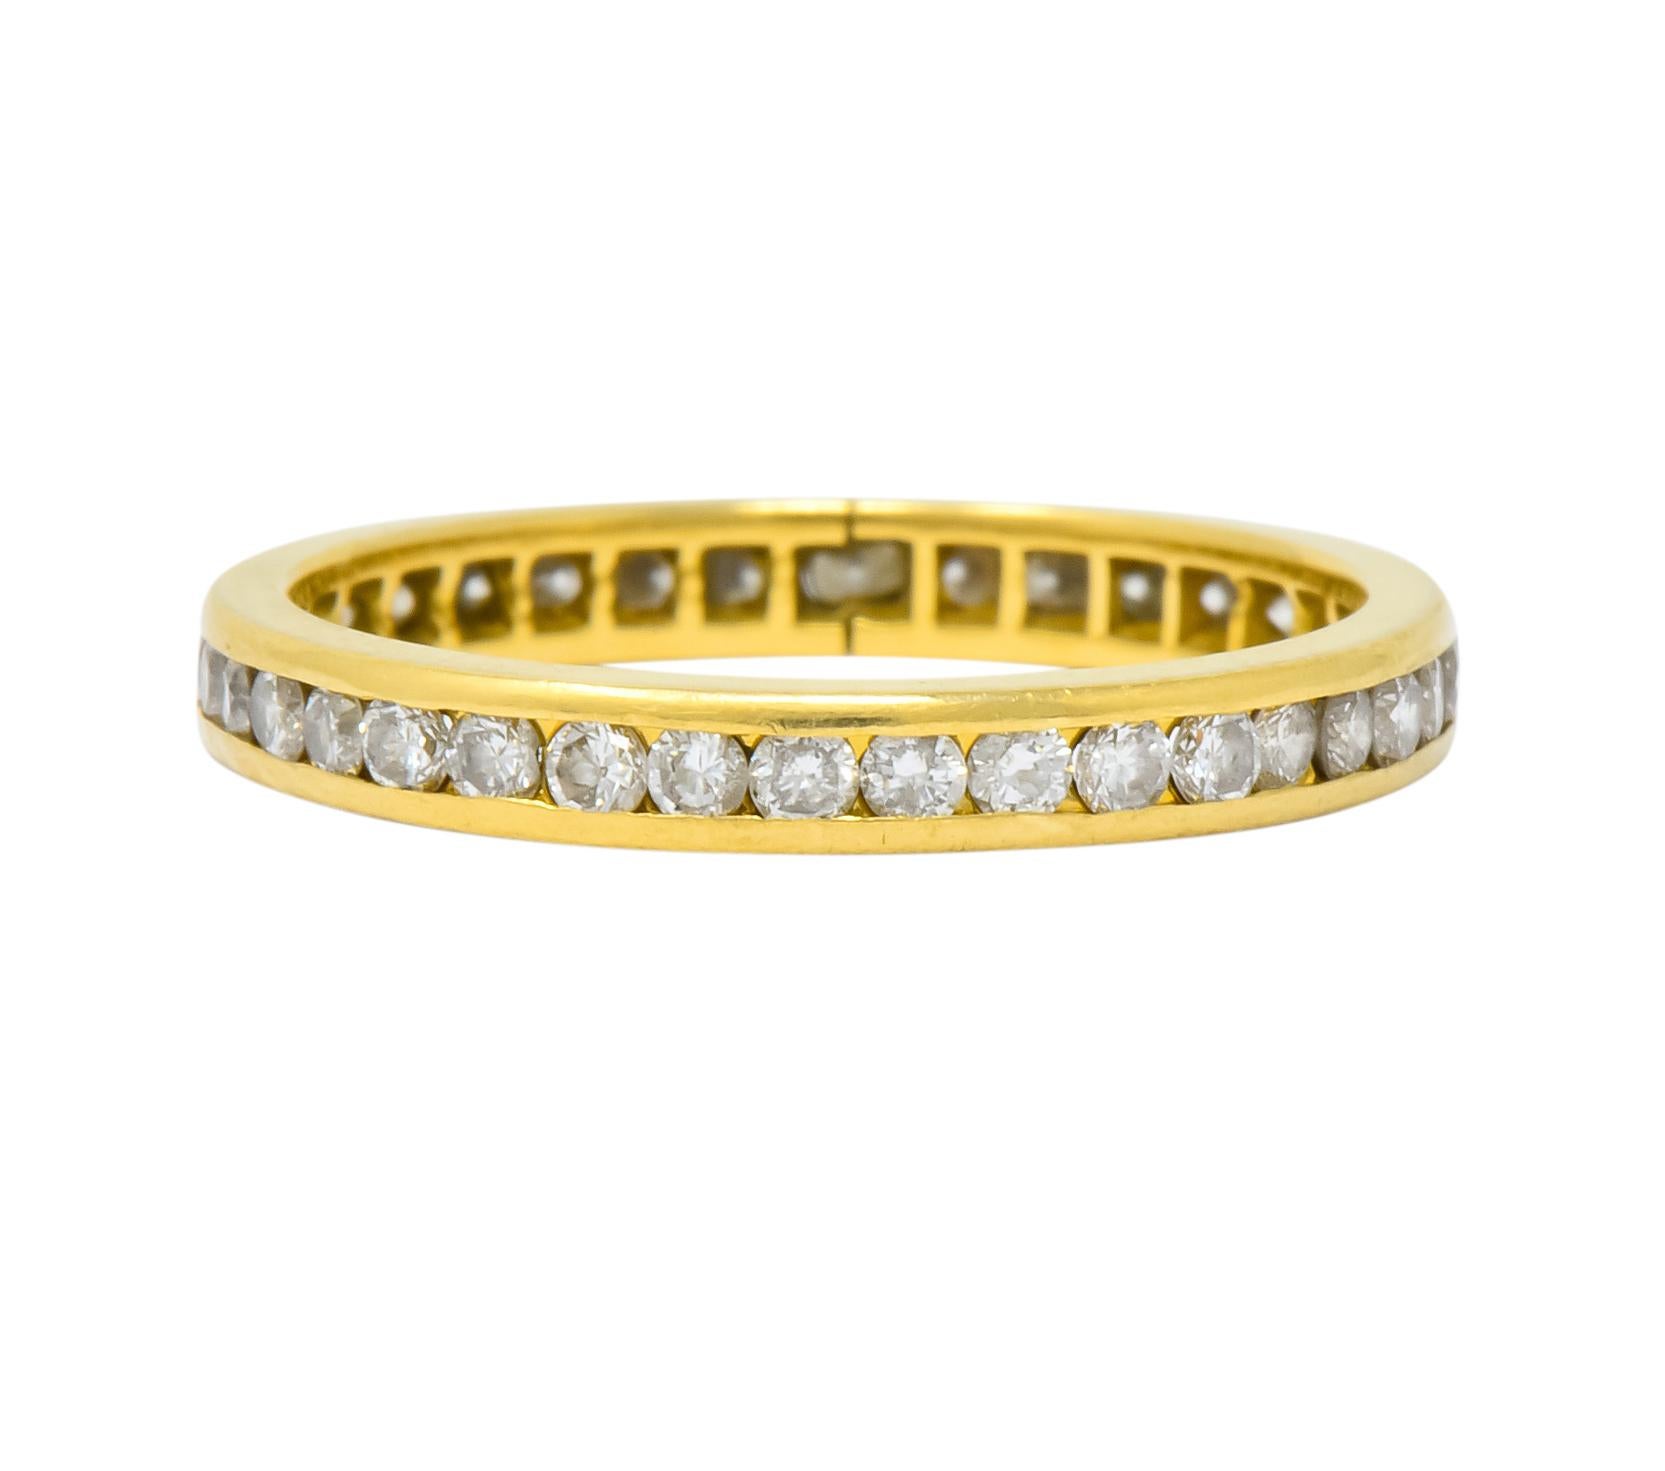 Set all the way around with round brilliant cut diamonds

Thirty-six diamonds total, weighing approximately 0.75 carat, H/I color and SI to I clarity

Channel set

Tested as 14 karat gold

Ring Size: 4 1/2 & Not Sizable

Top measures 2.4 mm and sits